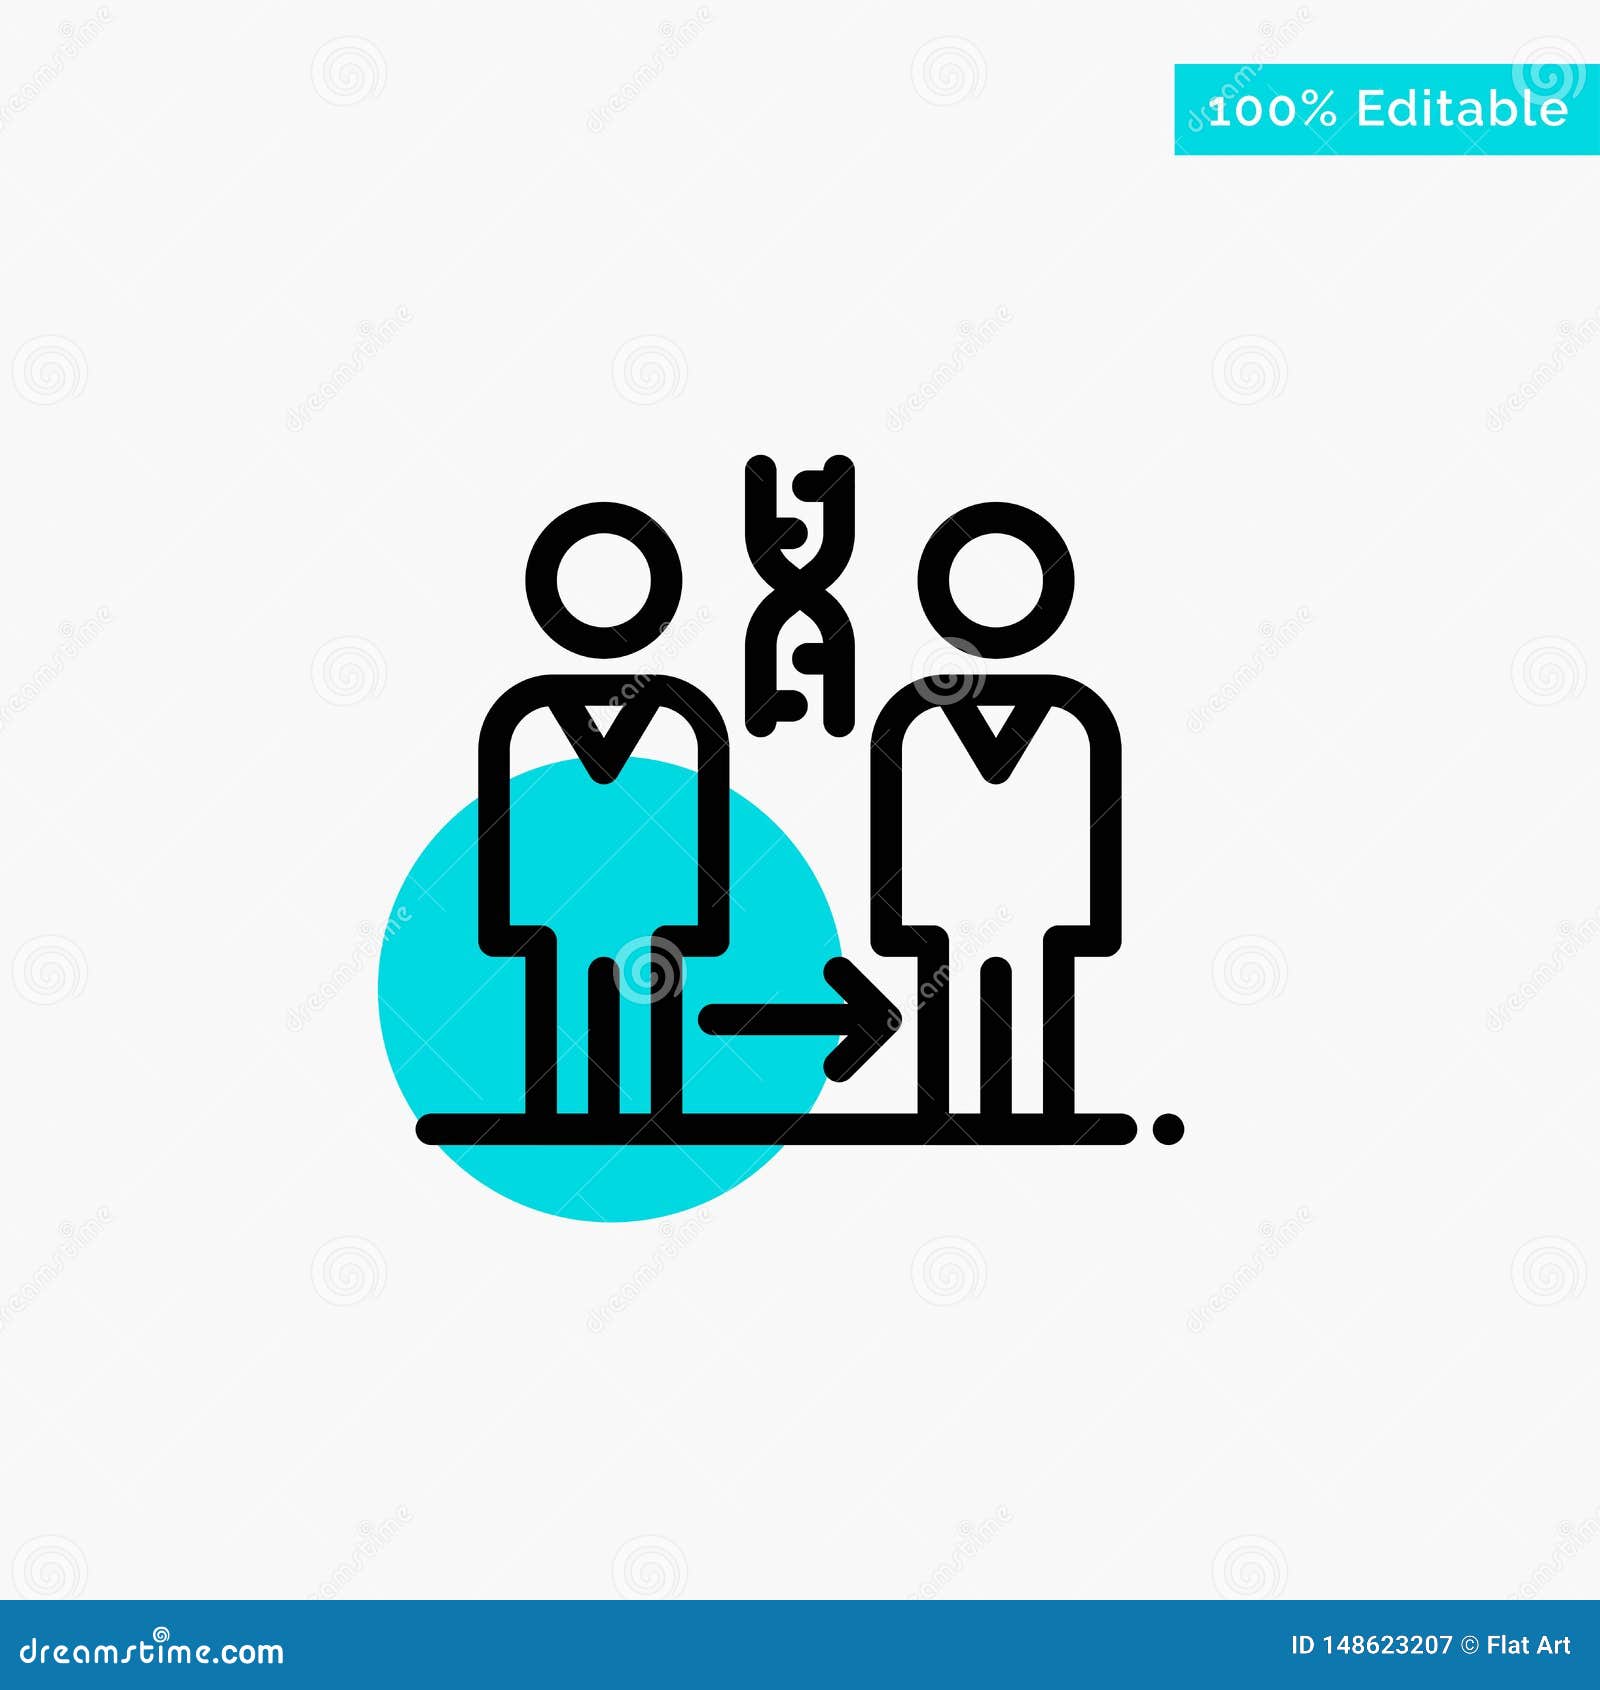 dna, cloning, patient, hospital, health turquoise highlight circle point  icon